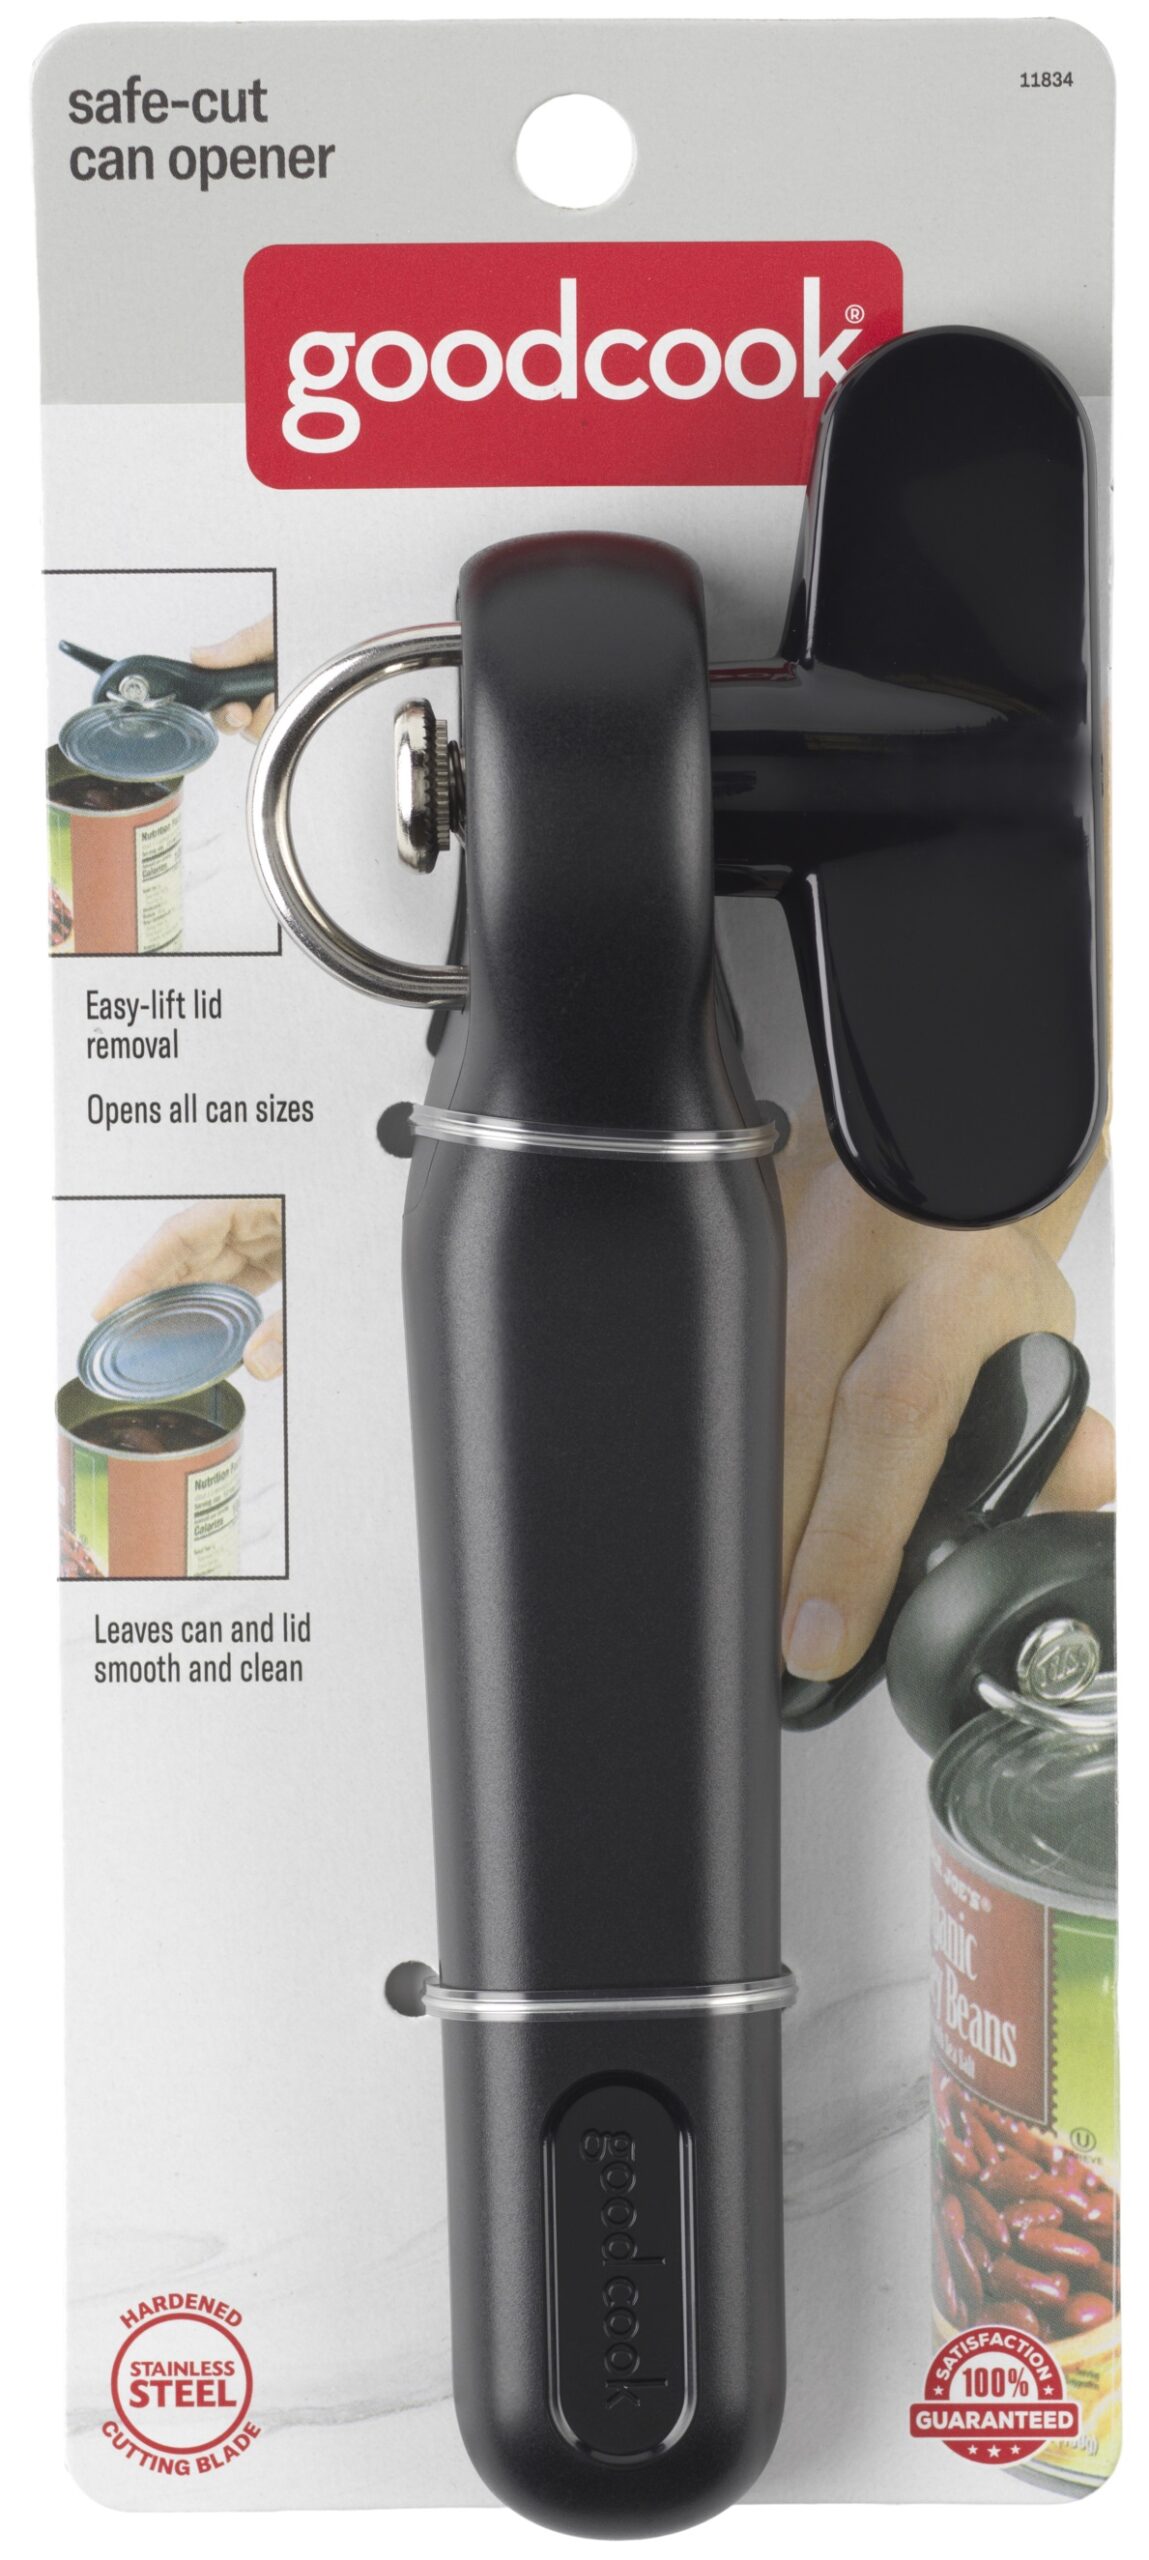 11834_GoodCook_Everyday_Safecut Can Opener_Packaging 1.psd